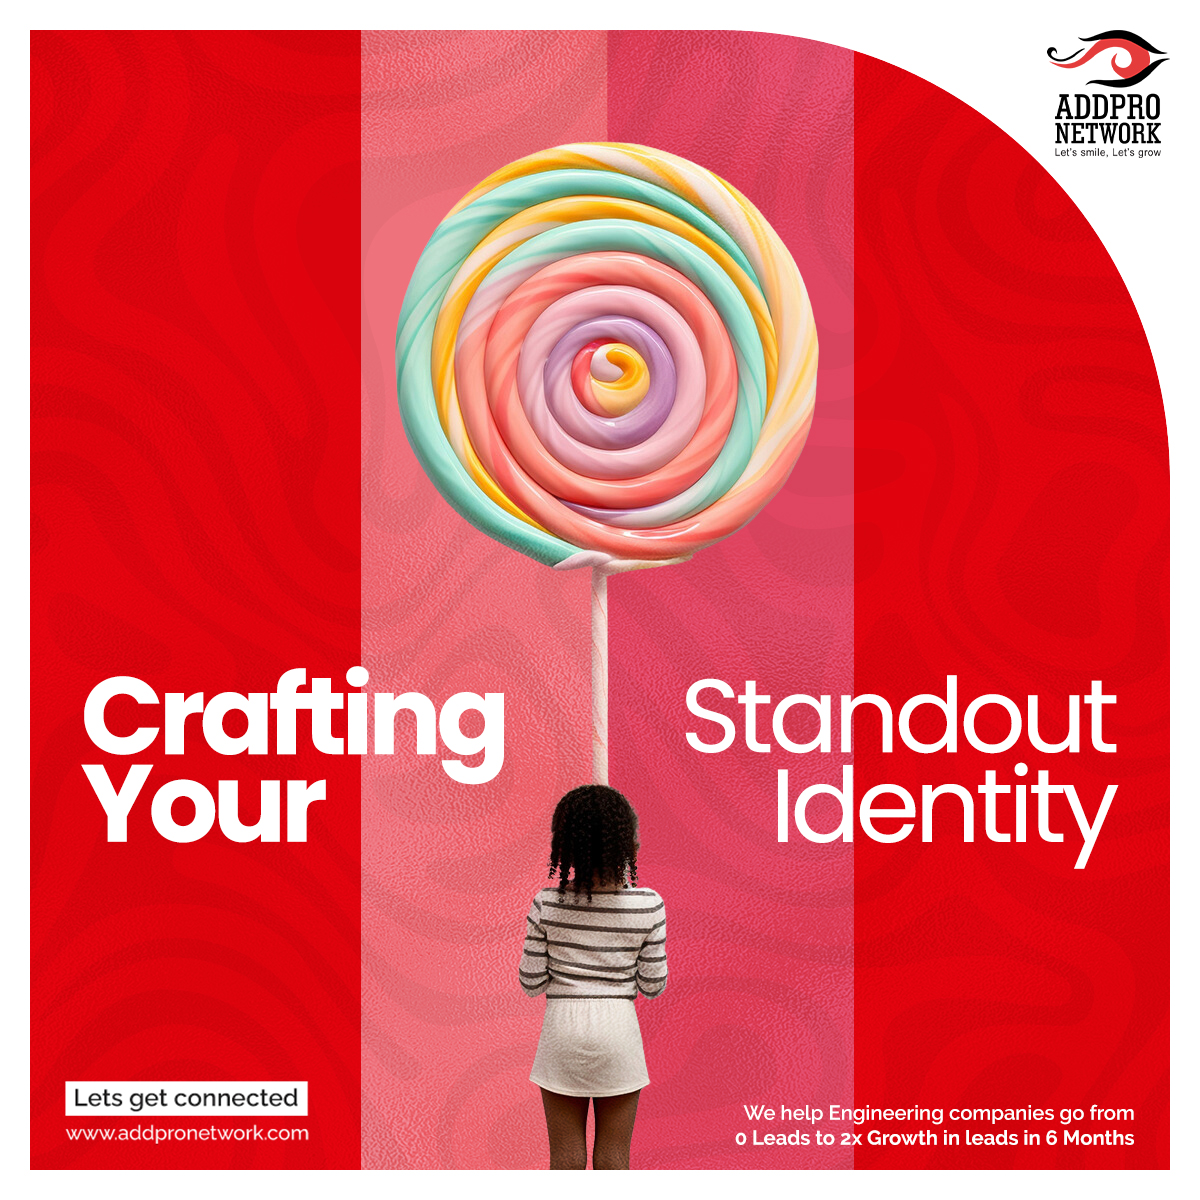 Crafting your standout identity: Unveiling your unique essence with precision. #personalbranding #identitybuilding

Addpro helps engineering companies soar from 0leads to 2x growth in leads within 6 months! #leadgeneration #engineeringgrowth